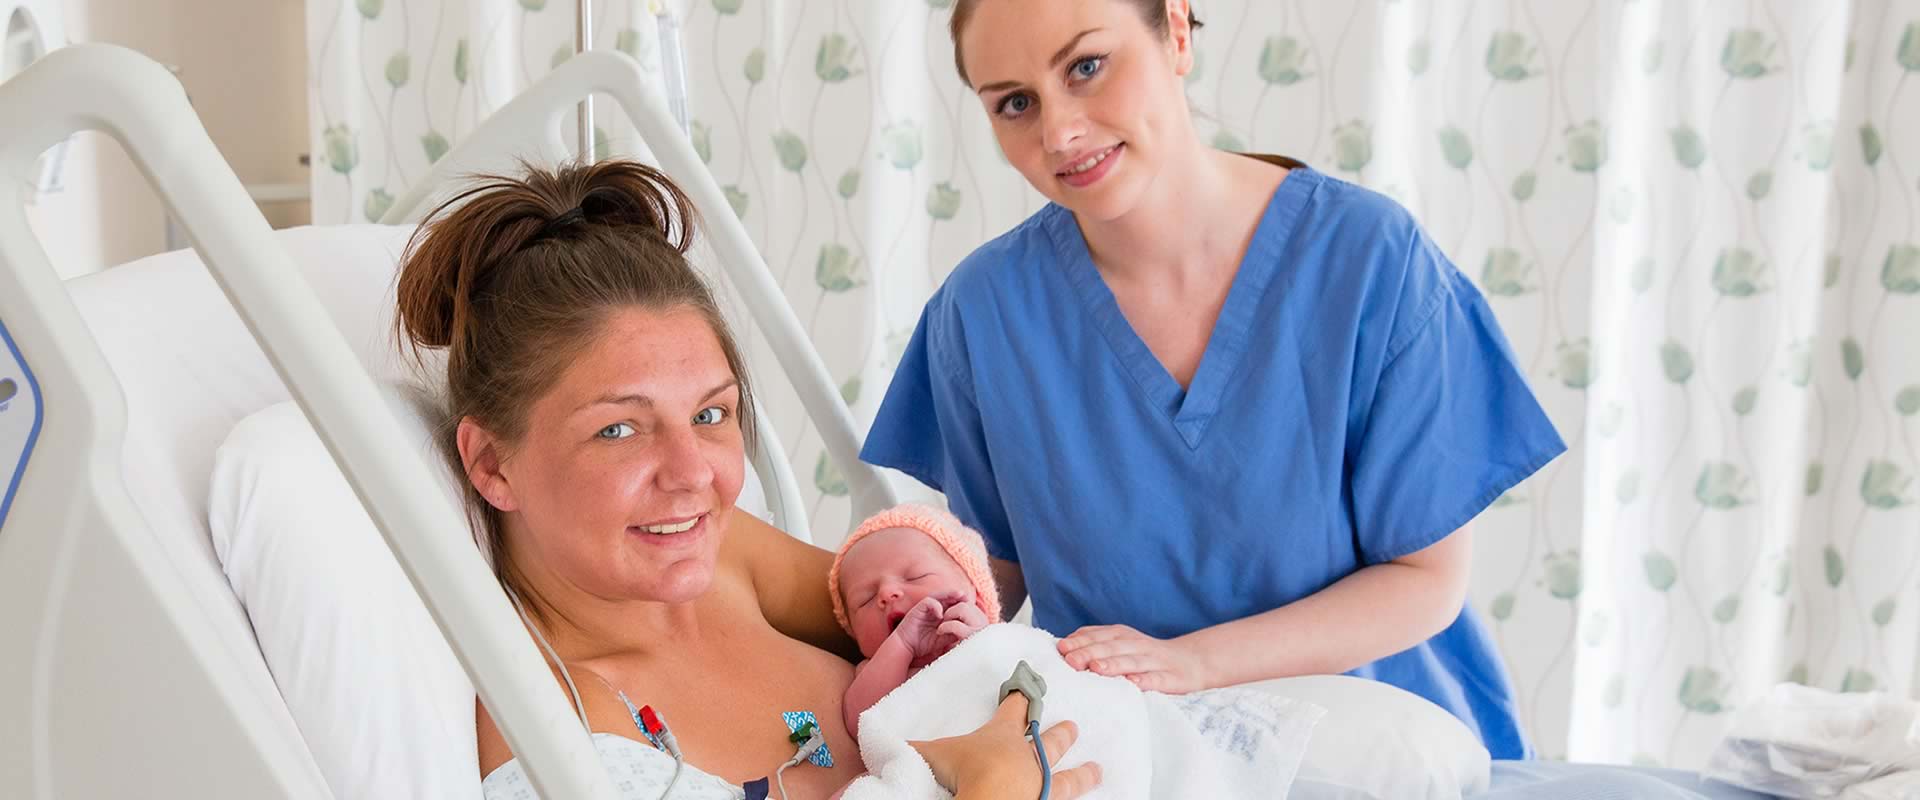 A woman and her newborn baby in a hospital post delivery suite